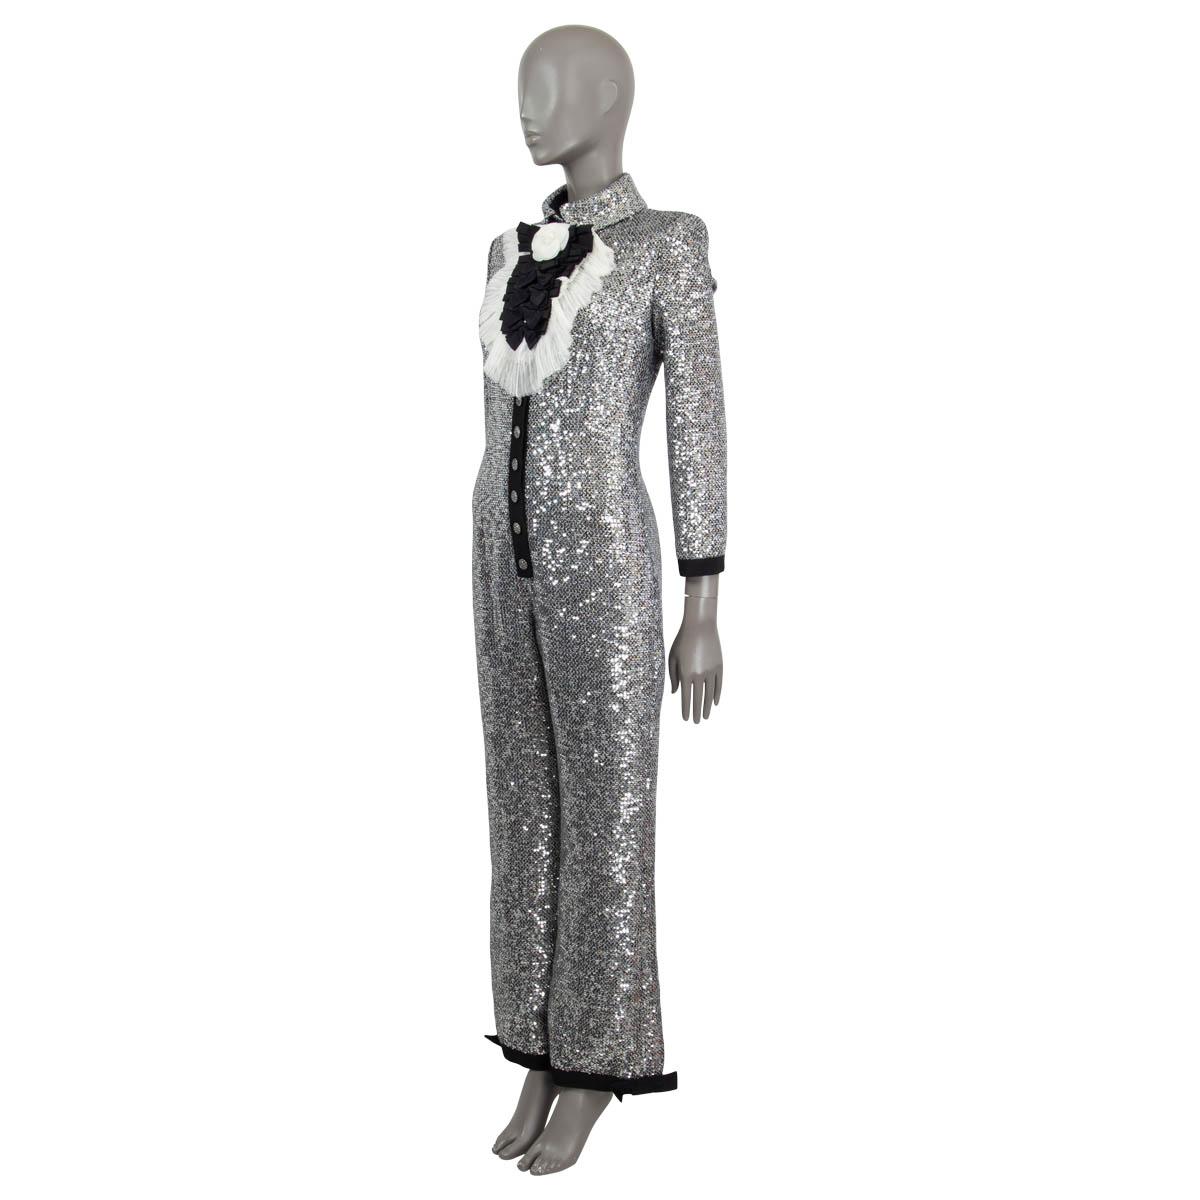 100% authentic Chanel long sleeve sequin jumpsuit in silver and black polyester (57%), cotton (22%), wool (17%) and metal polyester (4%). Features two side slit pockets, a grosgrain trim and bows on the pant cuffs. Comes with a detachable black and